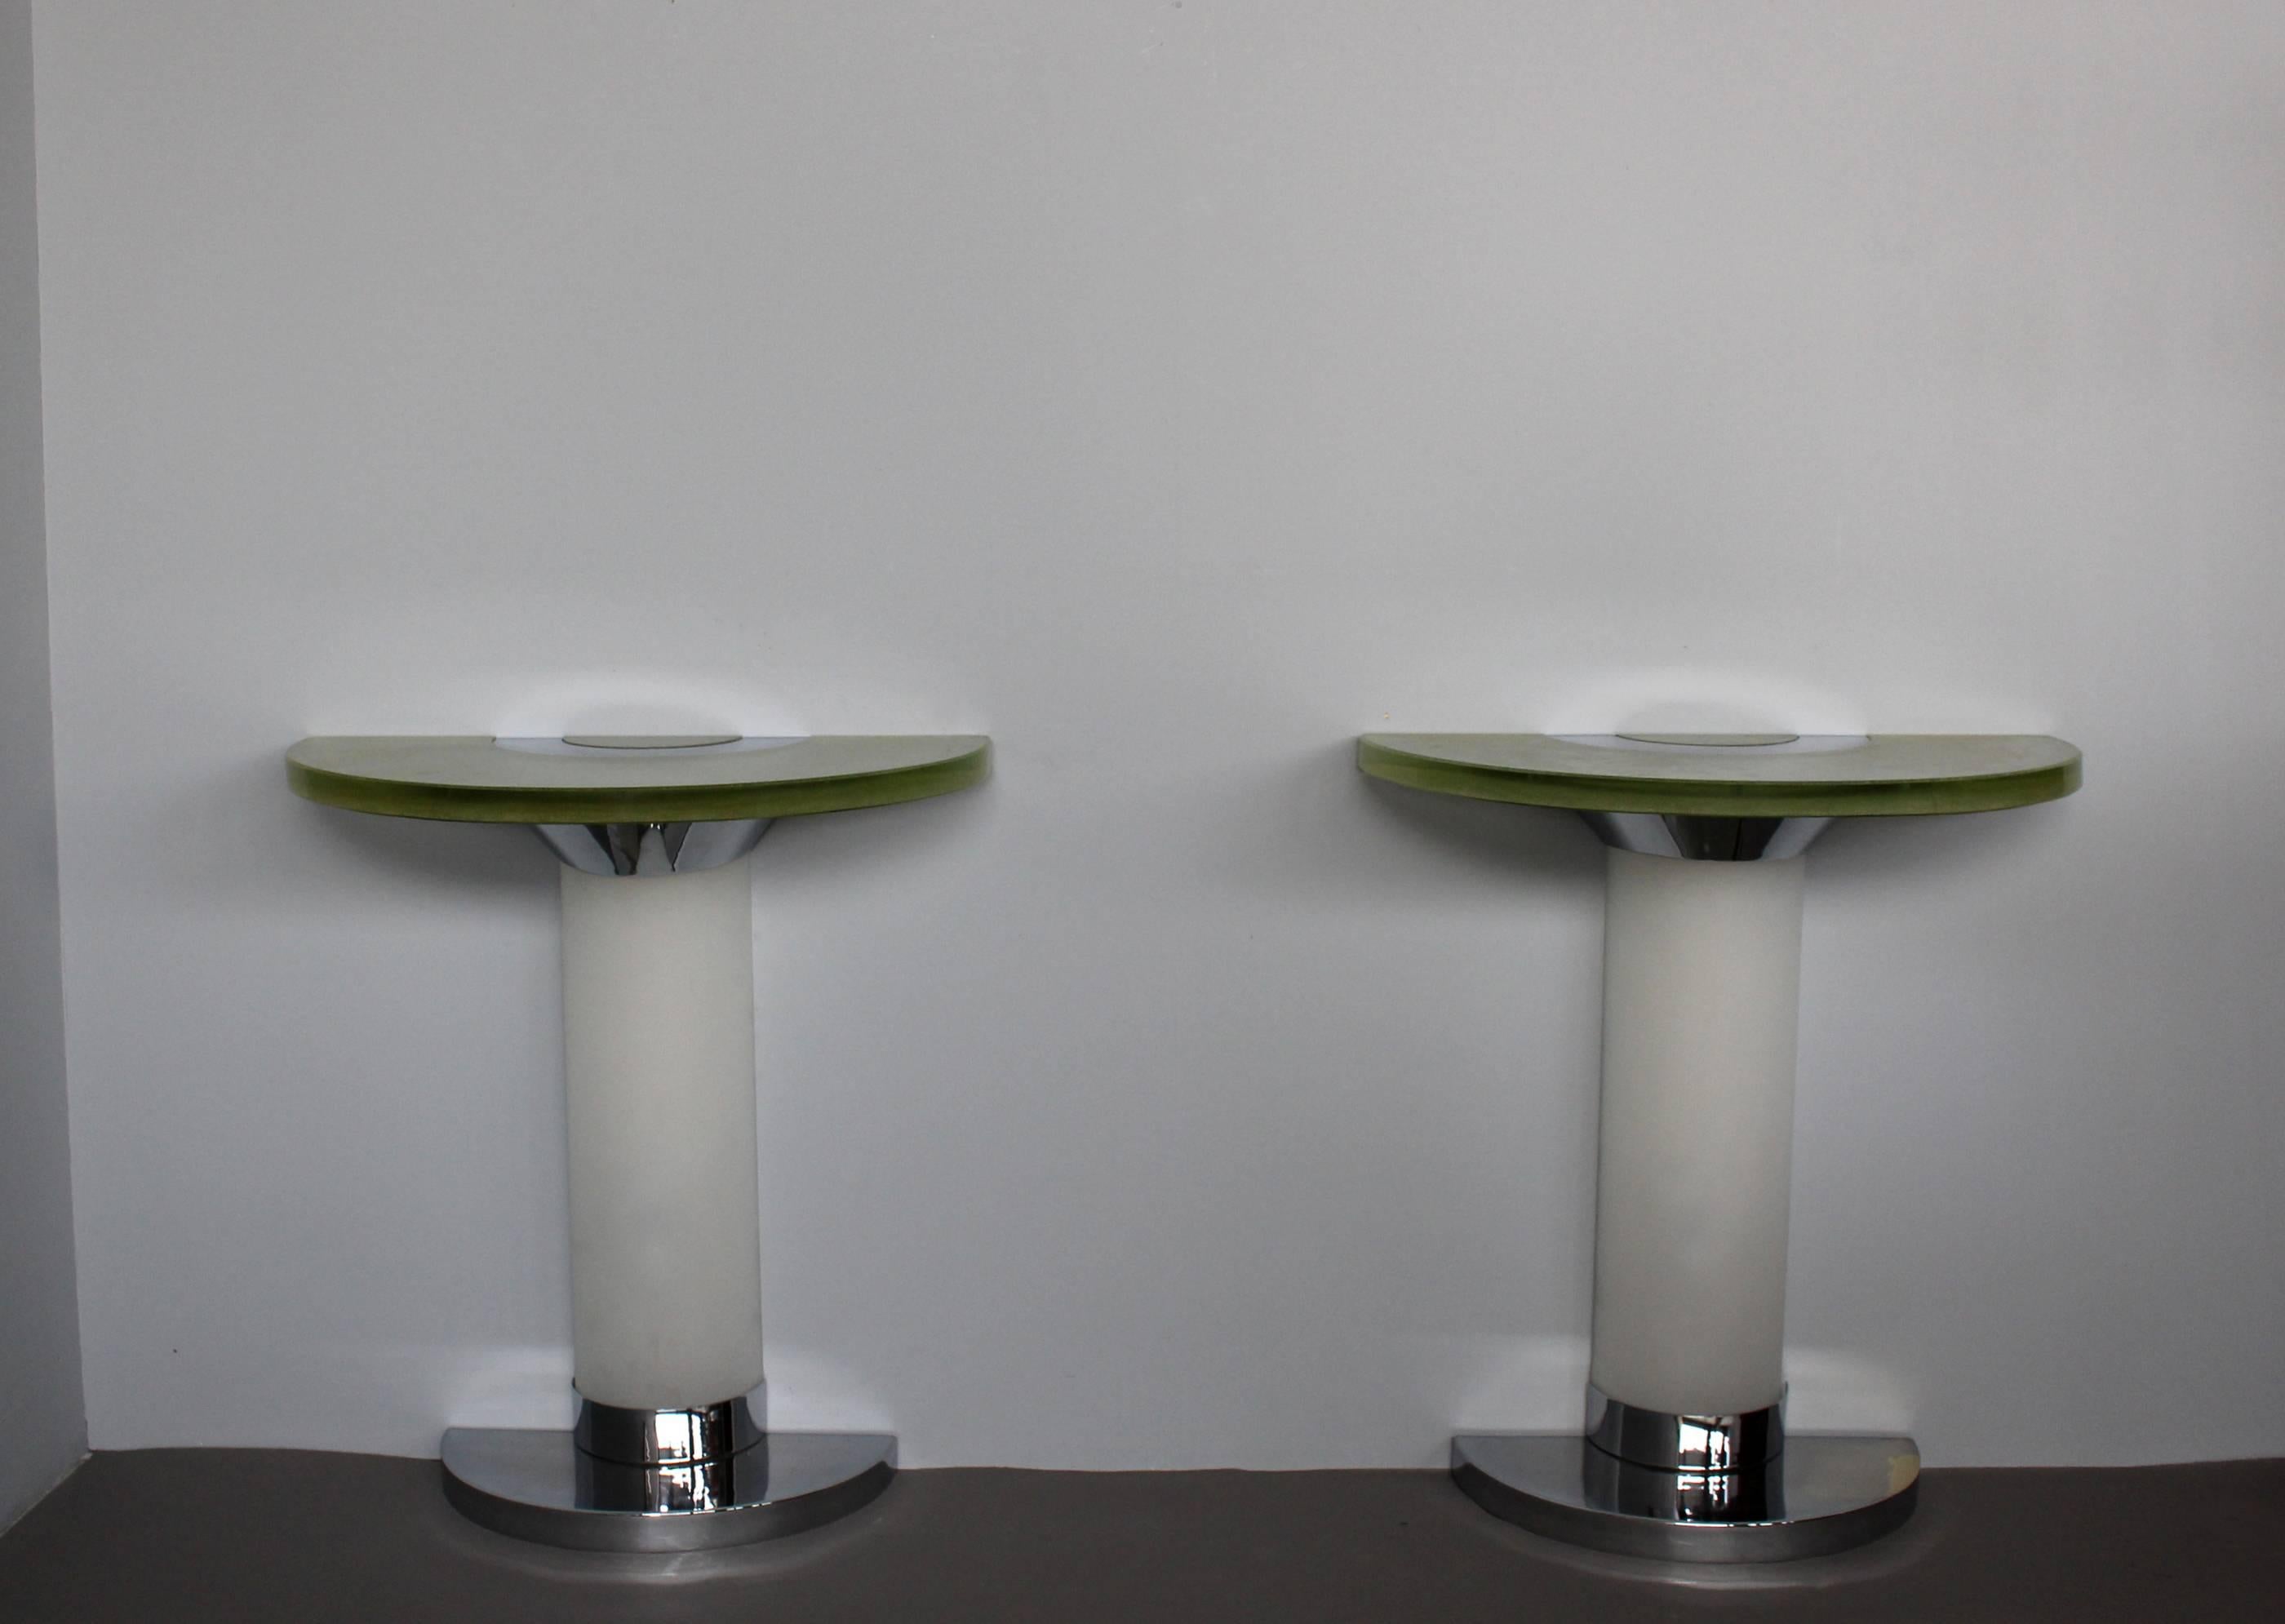 Rare pair of vintage French Art Deco glass and chrome demi-lune console tables by Jean Perzel with their original Saint Gobain glass tops.